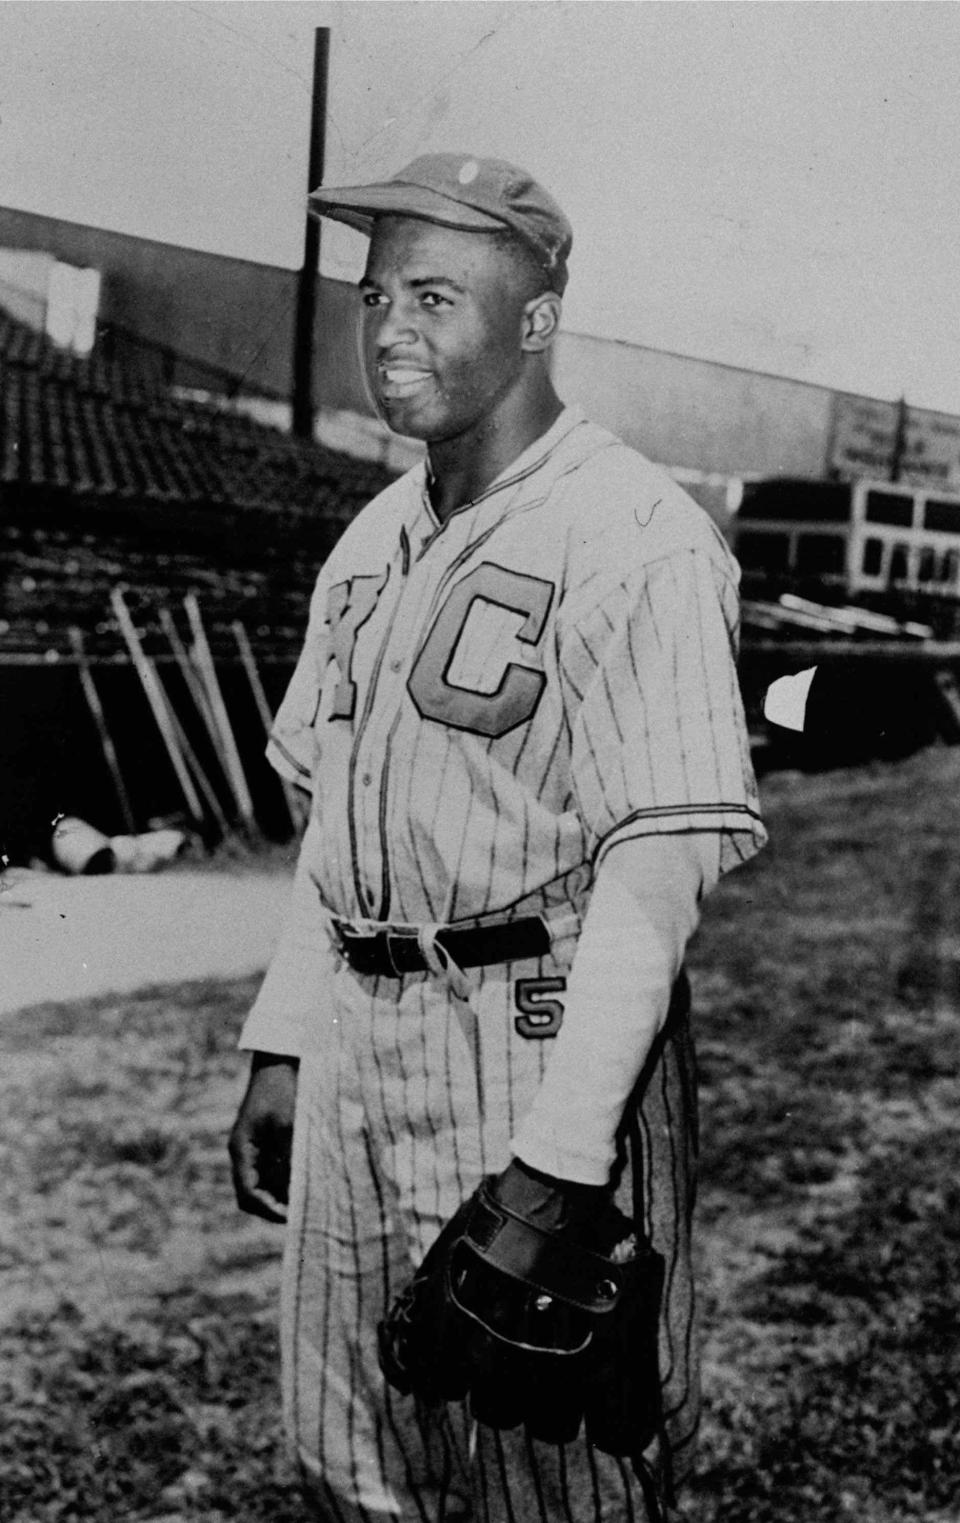 Jackie Robinson played for the Kansas City Monarchs of the Negro League.